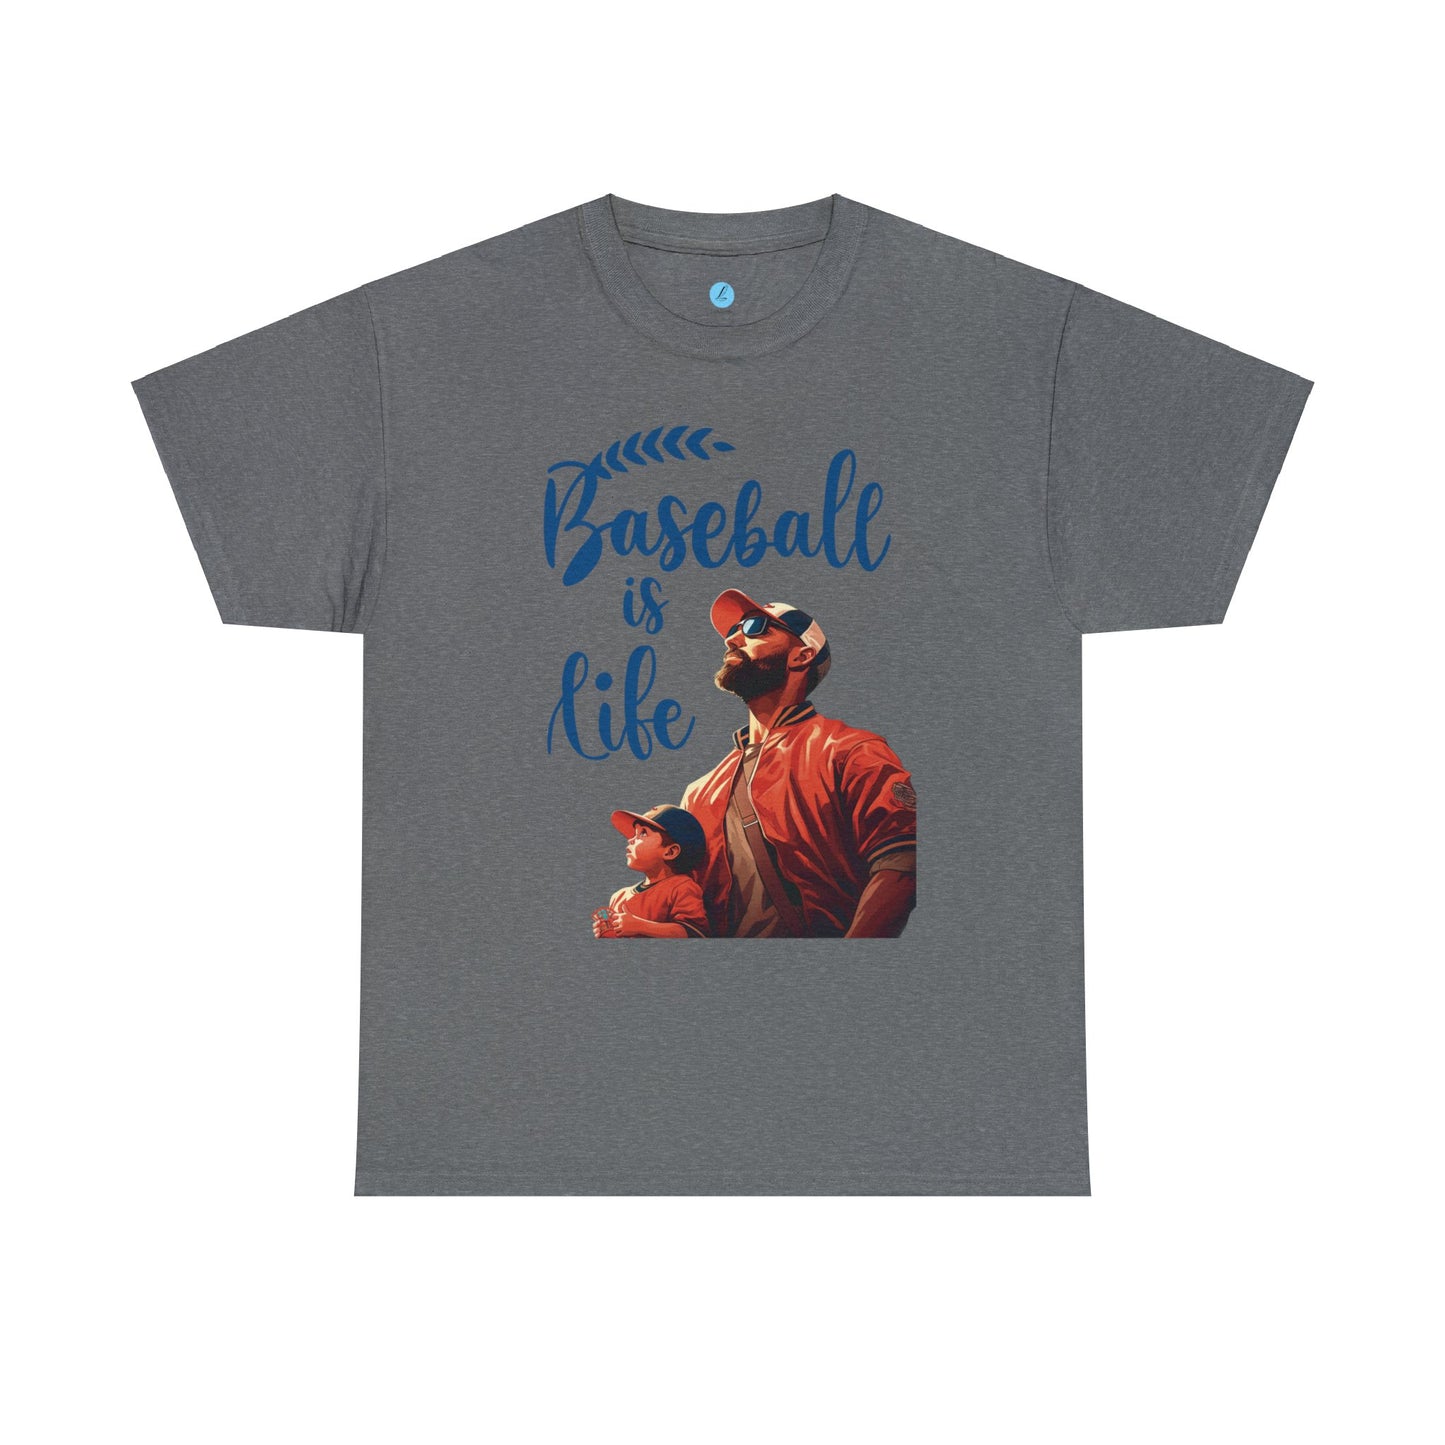 Baseball is Life, Father Son Drawing Sketch, Unisex T-Shirt